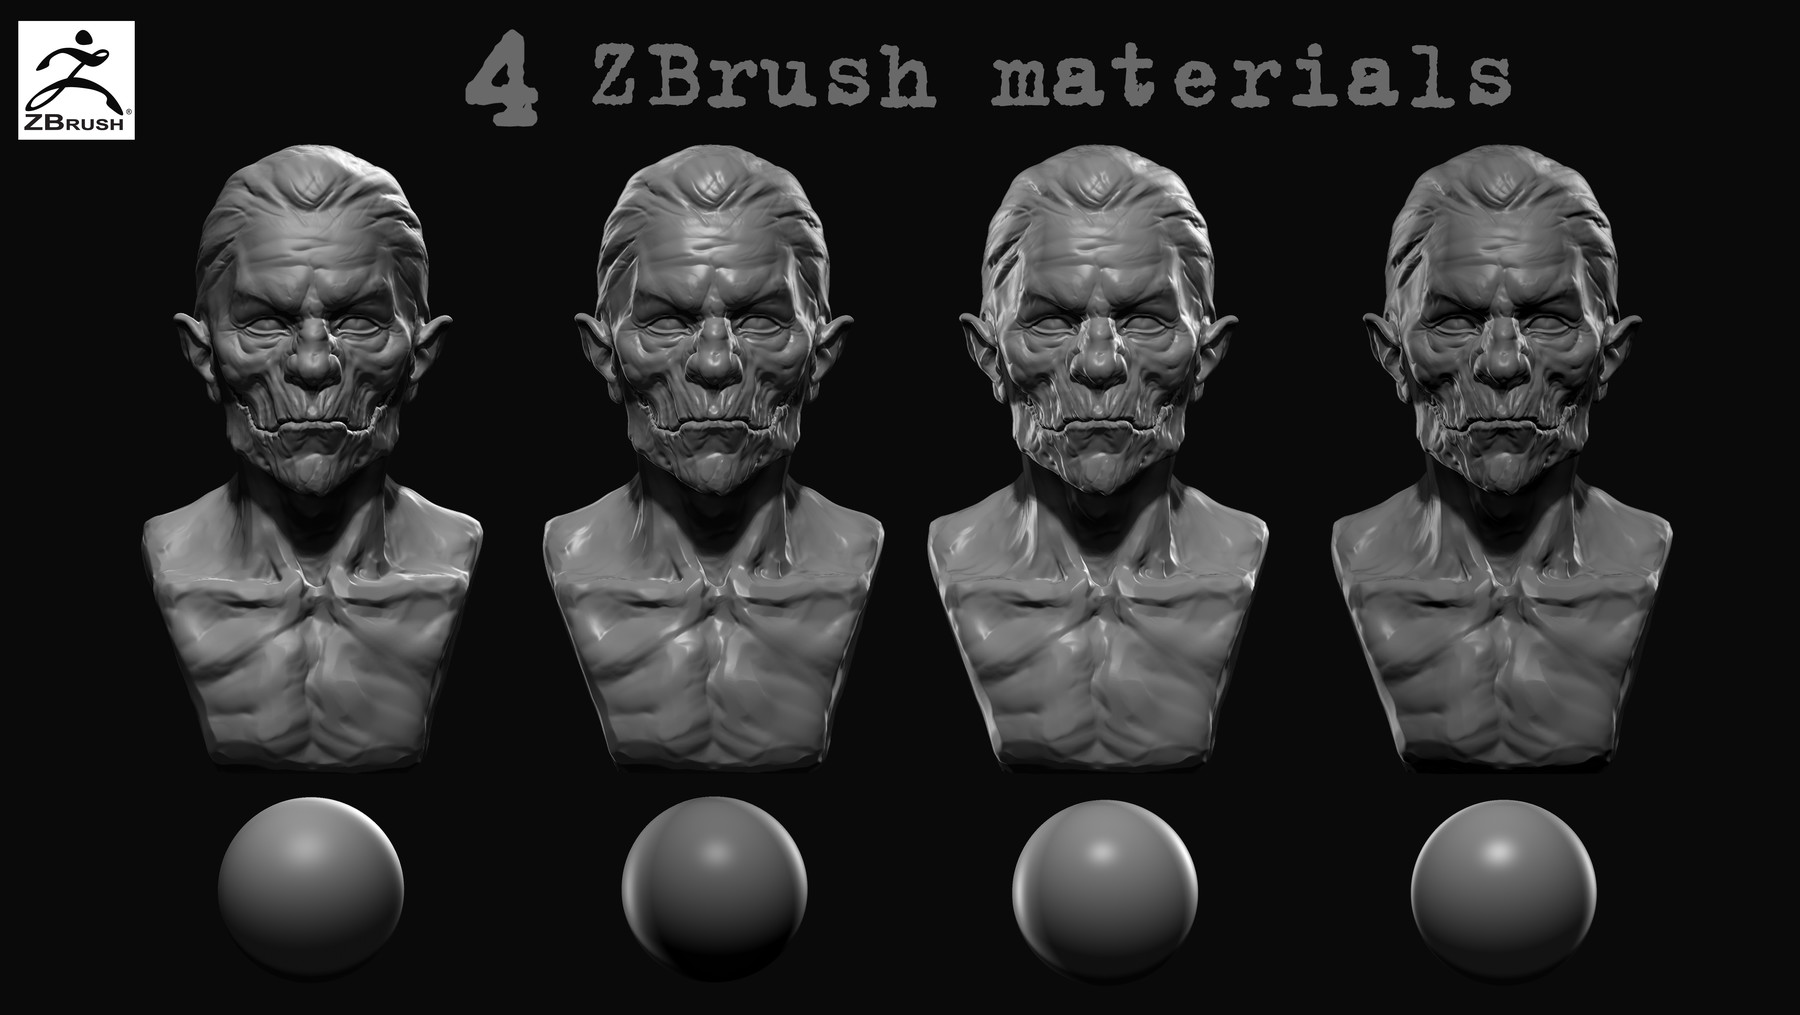 past zbrush versions